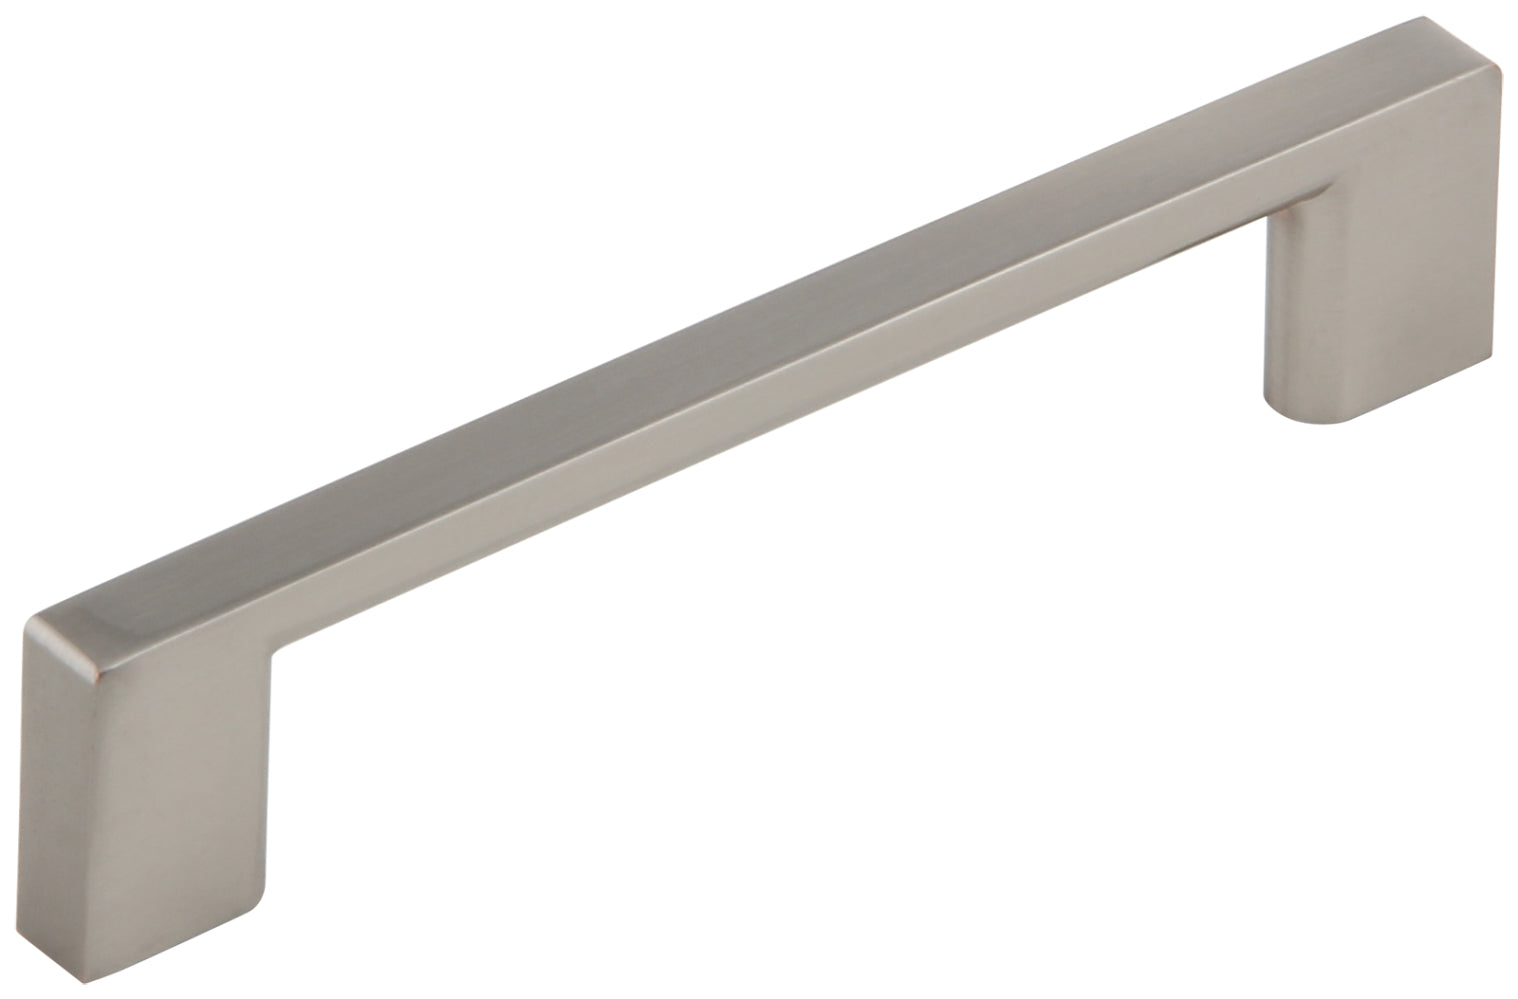 Silverline A2037 - 6 inch (128mm) Aluminum Square Bar Pull Handle in Brushed Satin Nickel Finish CC: 5 inch (128mm)